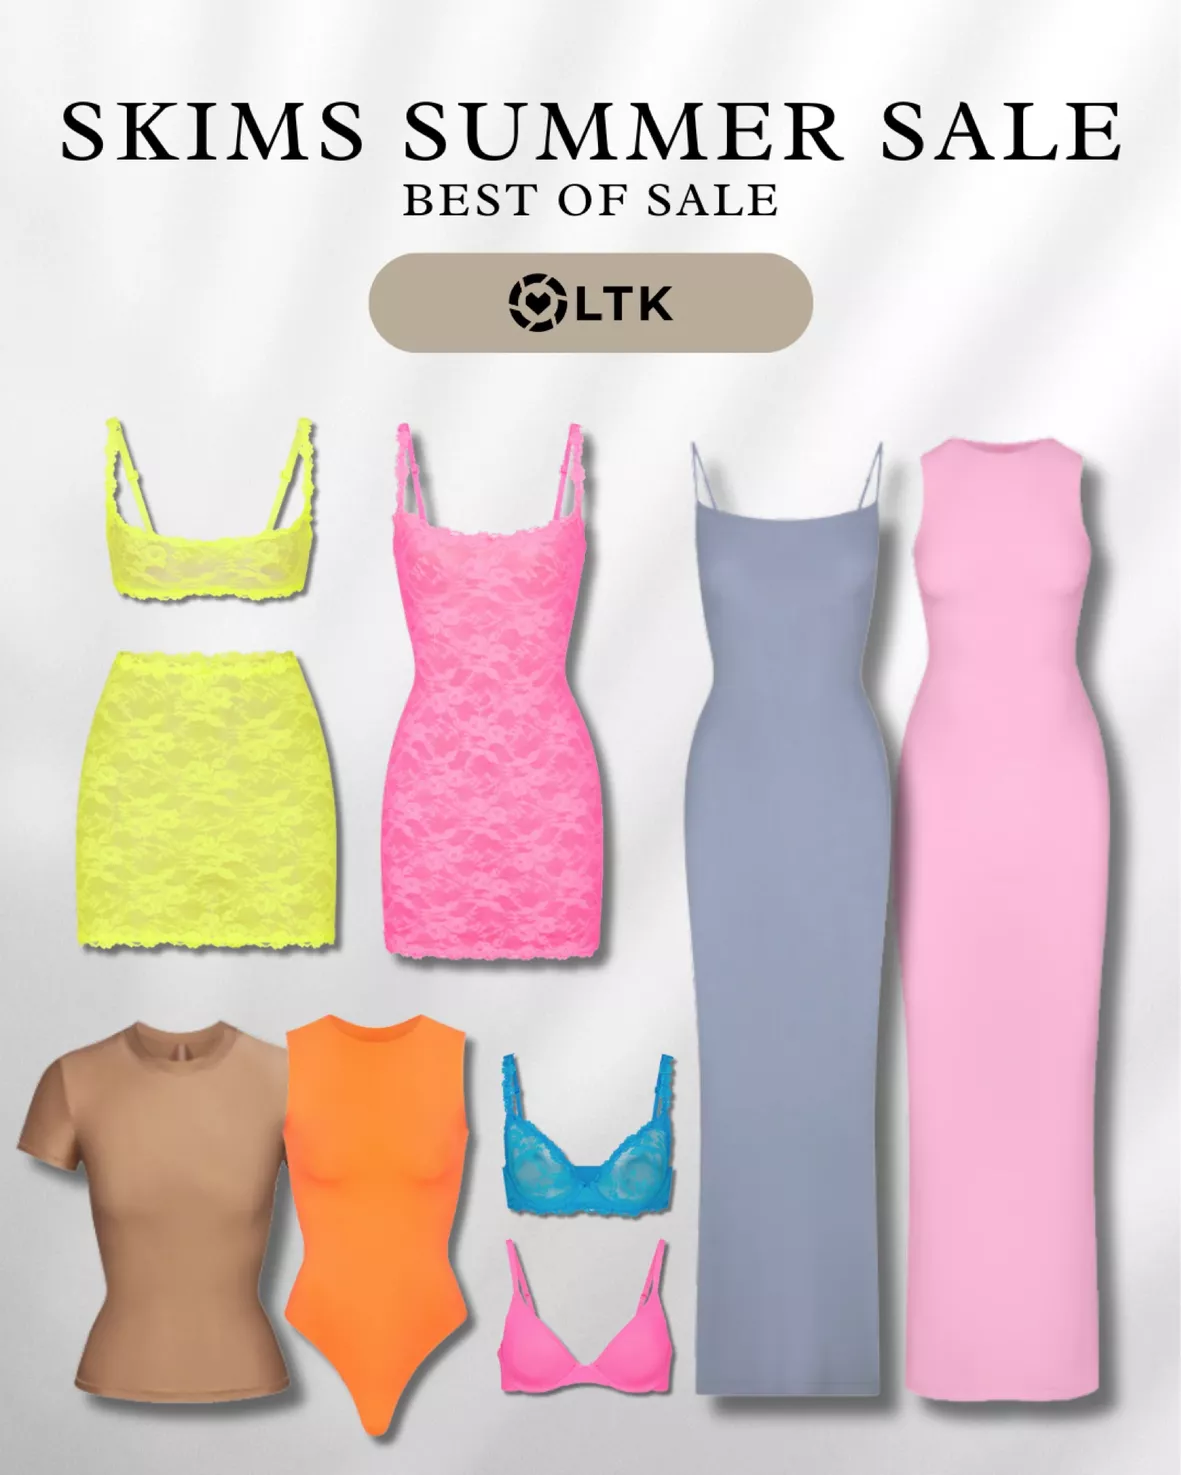 SKIMS Best Sellers  Everyday outfits, Ways to lace shoes, Women essentials